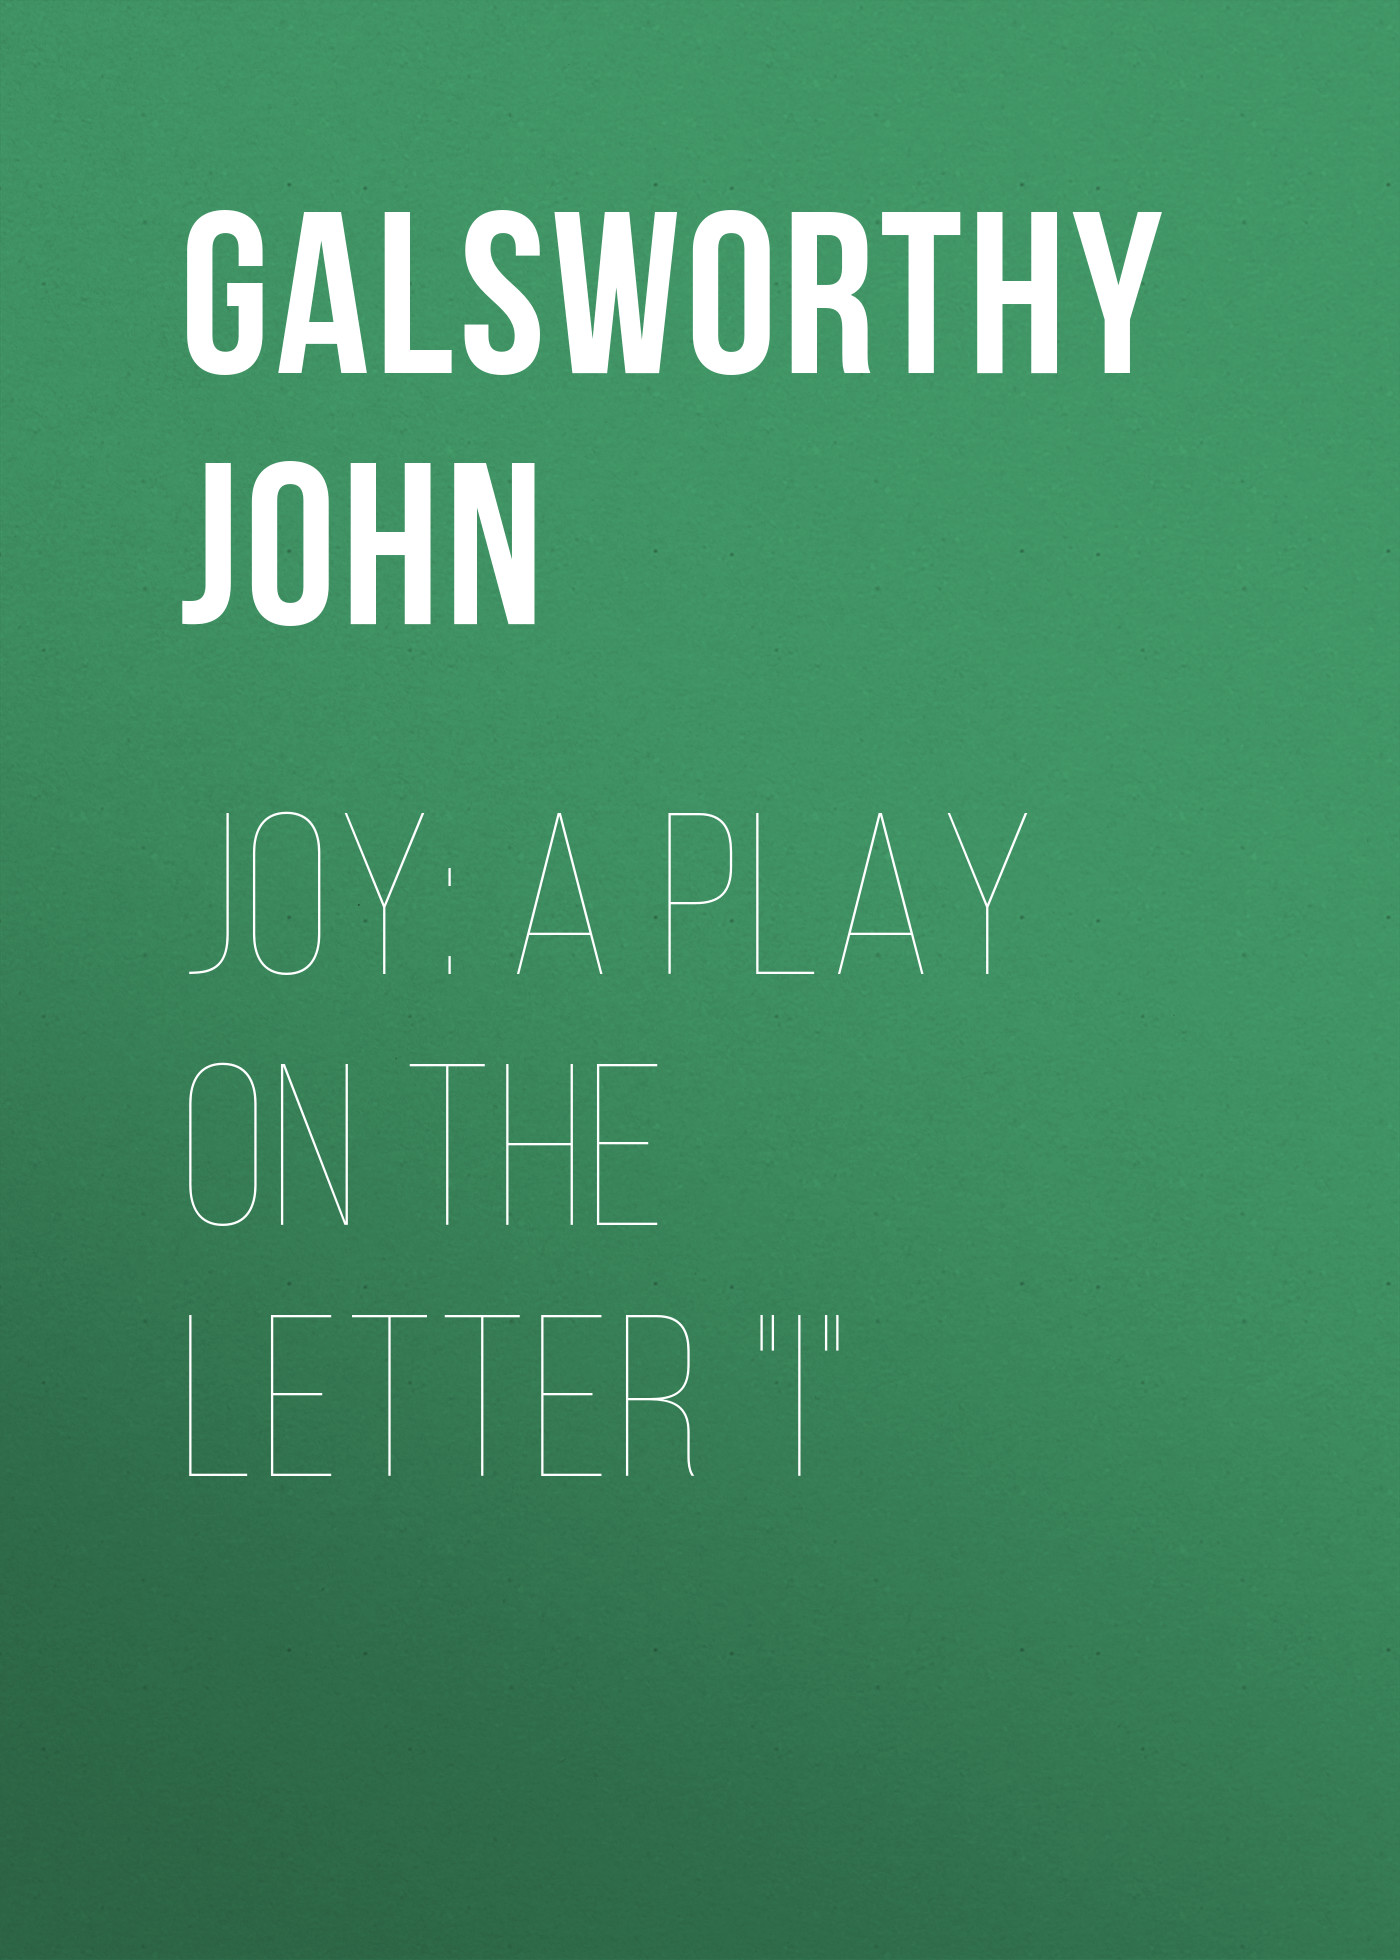 Joy: A Play on the Letter"I"